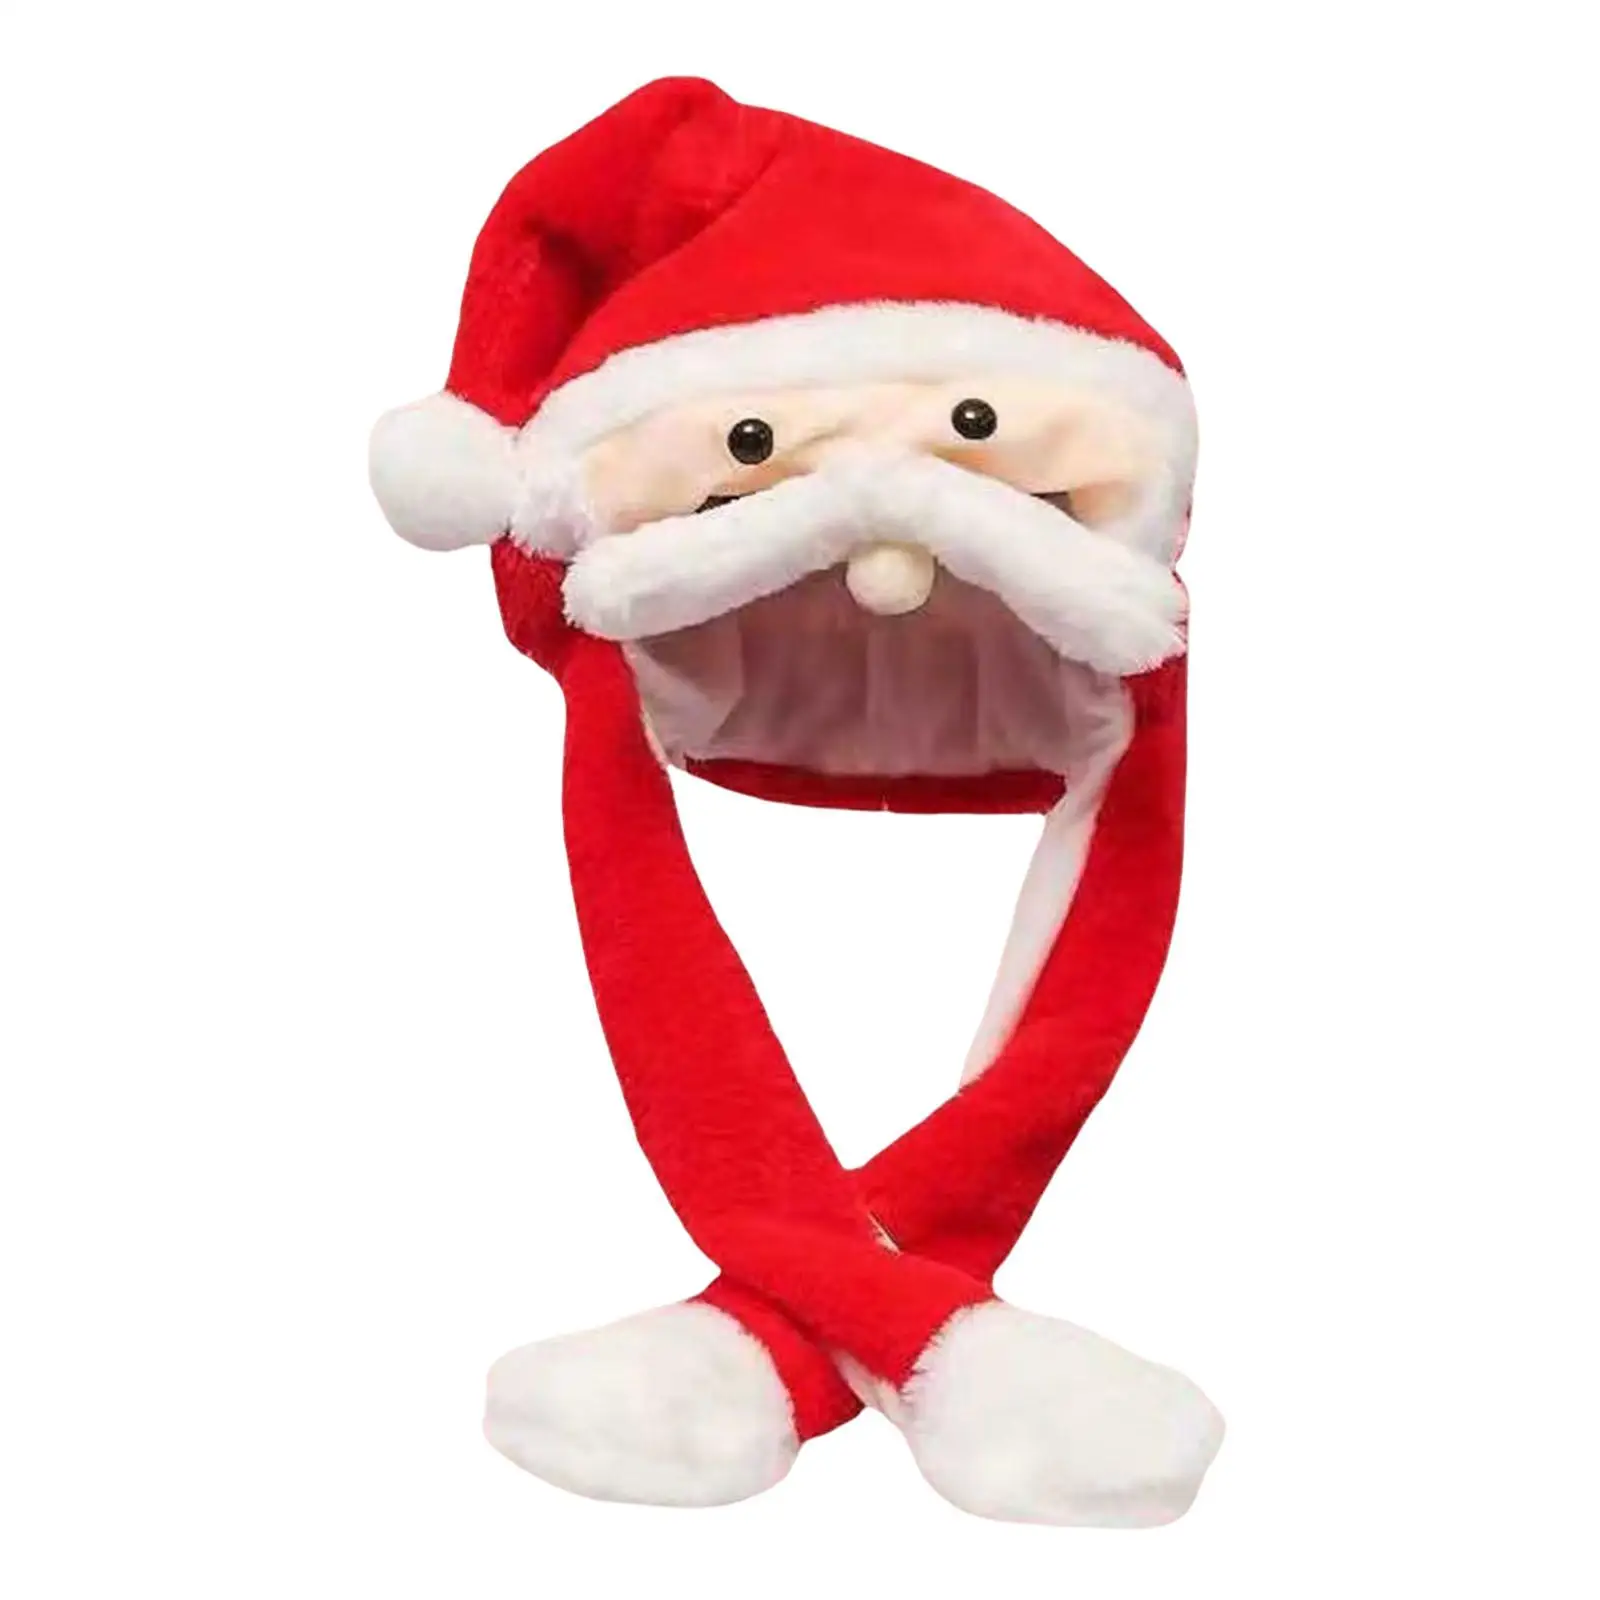 Funny Jumping Hat Costume Cosplay Dress up Christmas Plush Hat for Holiday Halloween Party Girls Boys Women